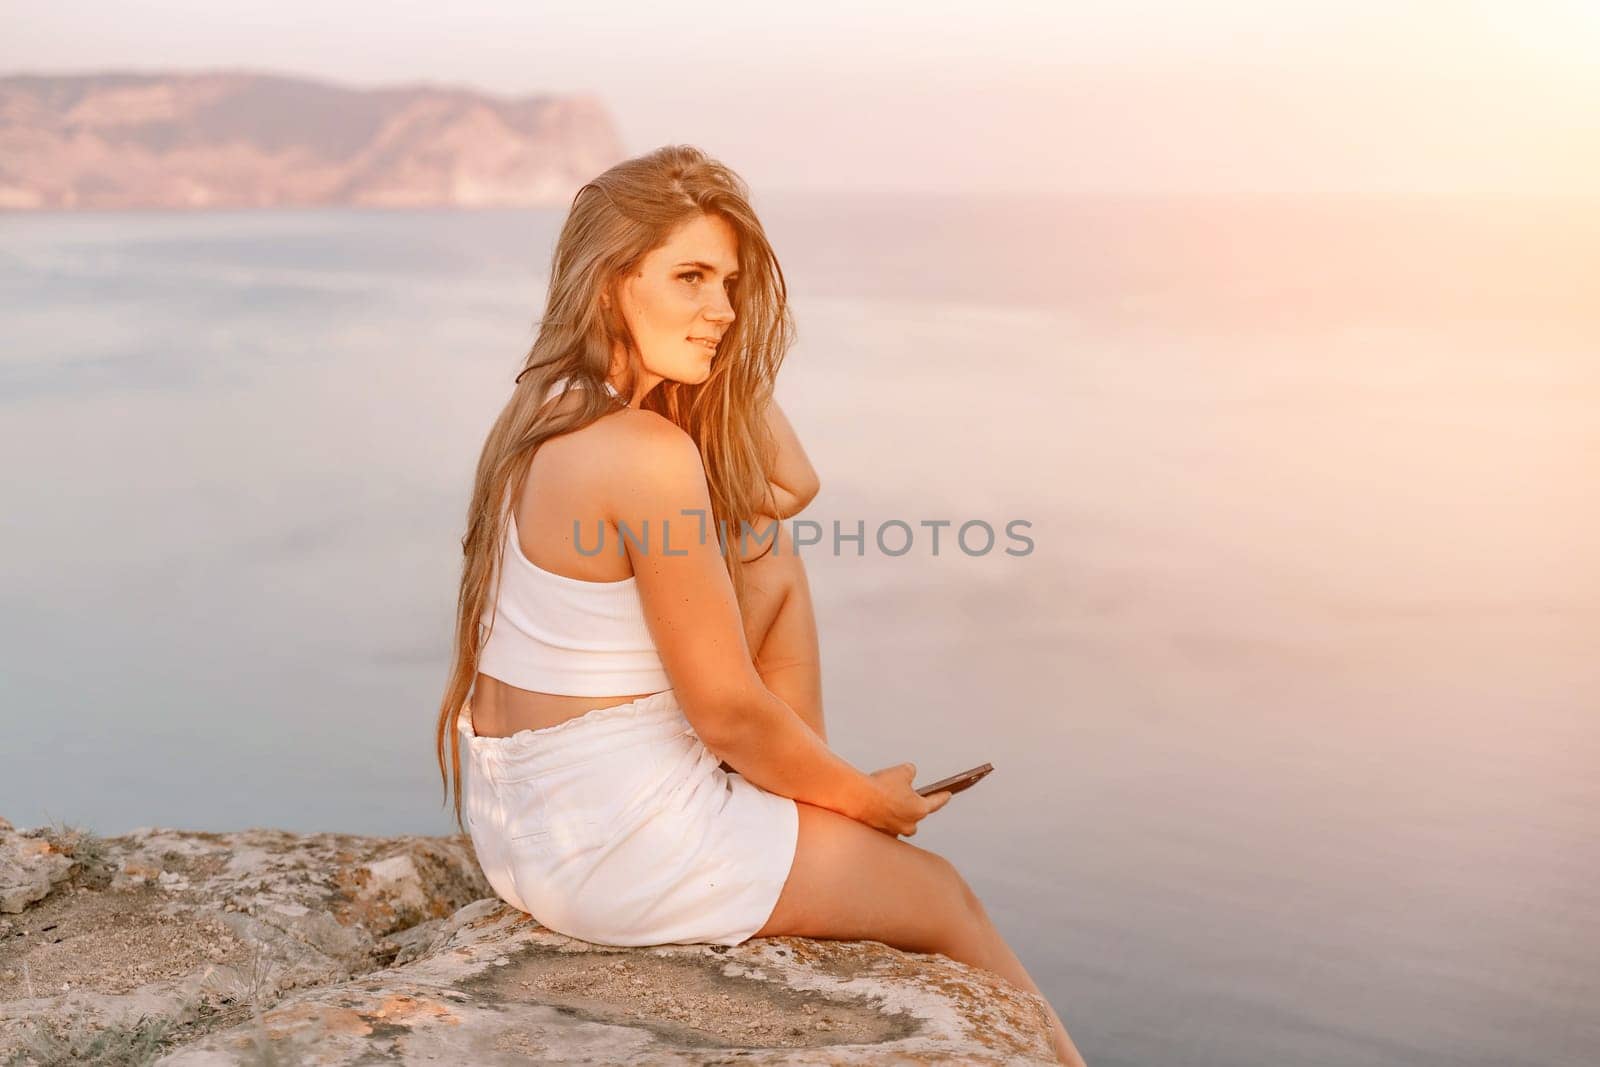 Happy woman in white shorts and T-shirt, with long hair, talking on the phone while enjoying the scenic view of the sea in the background